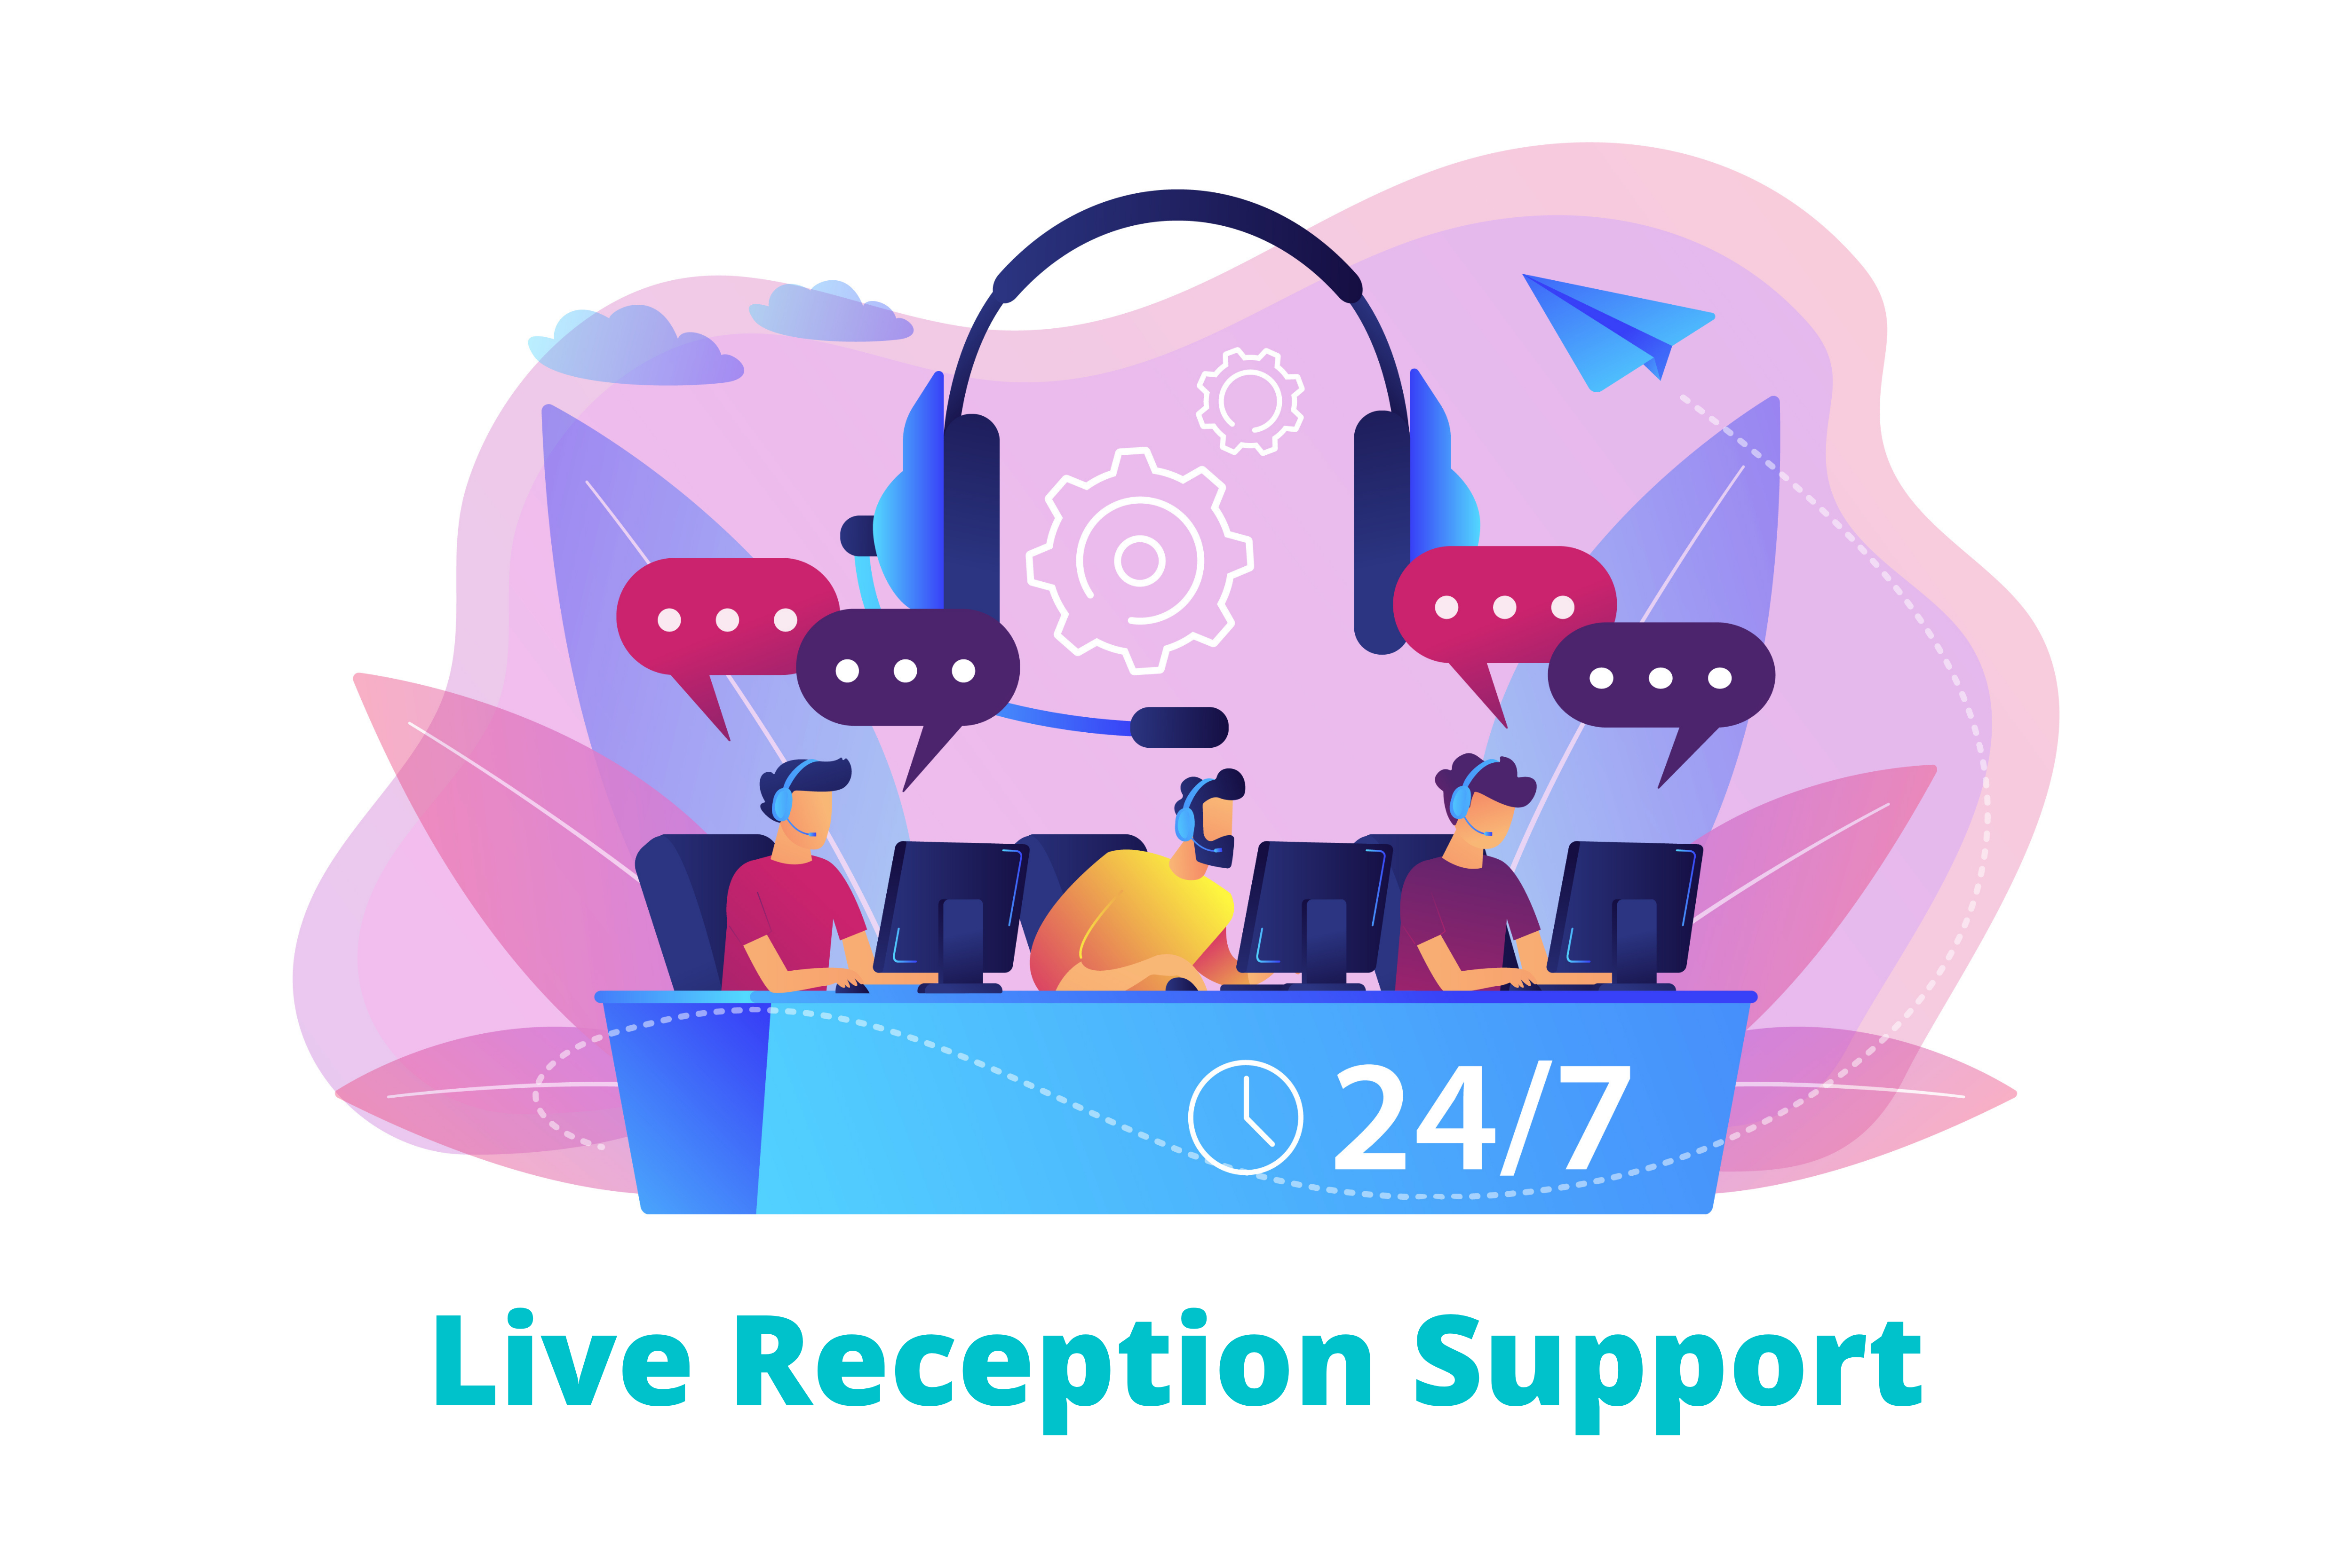 Live Reception Support